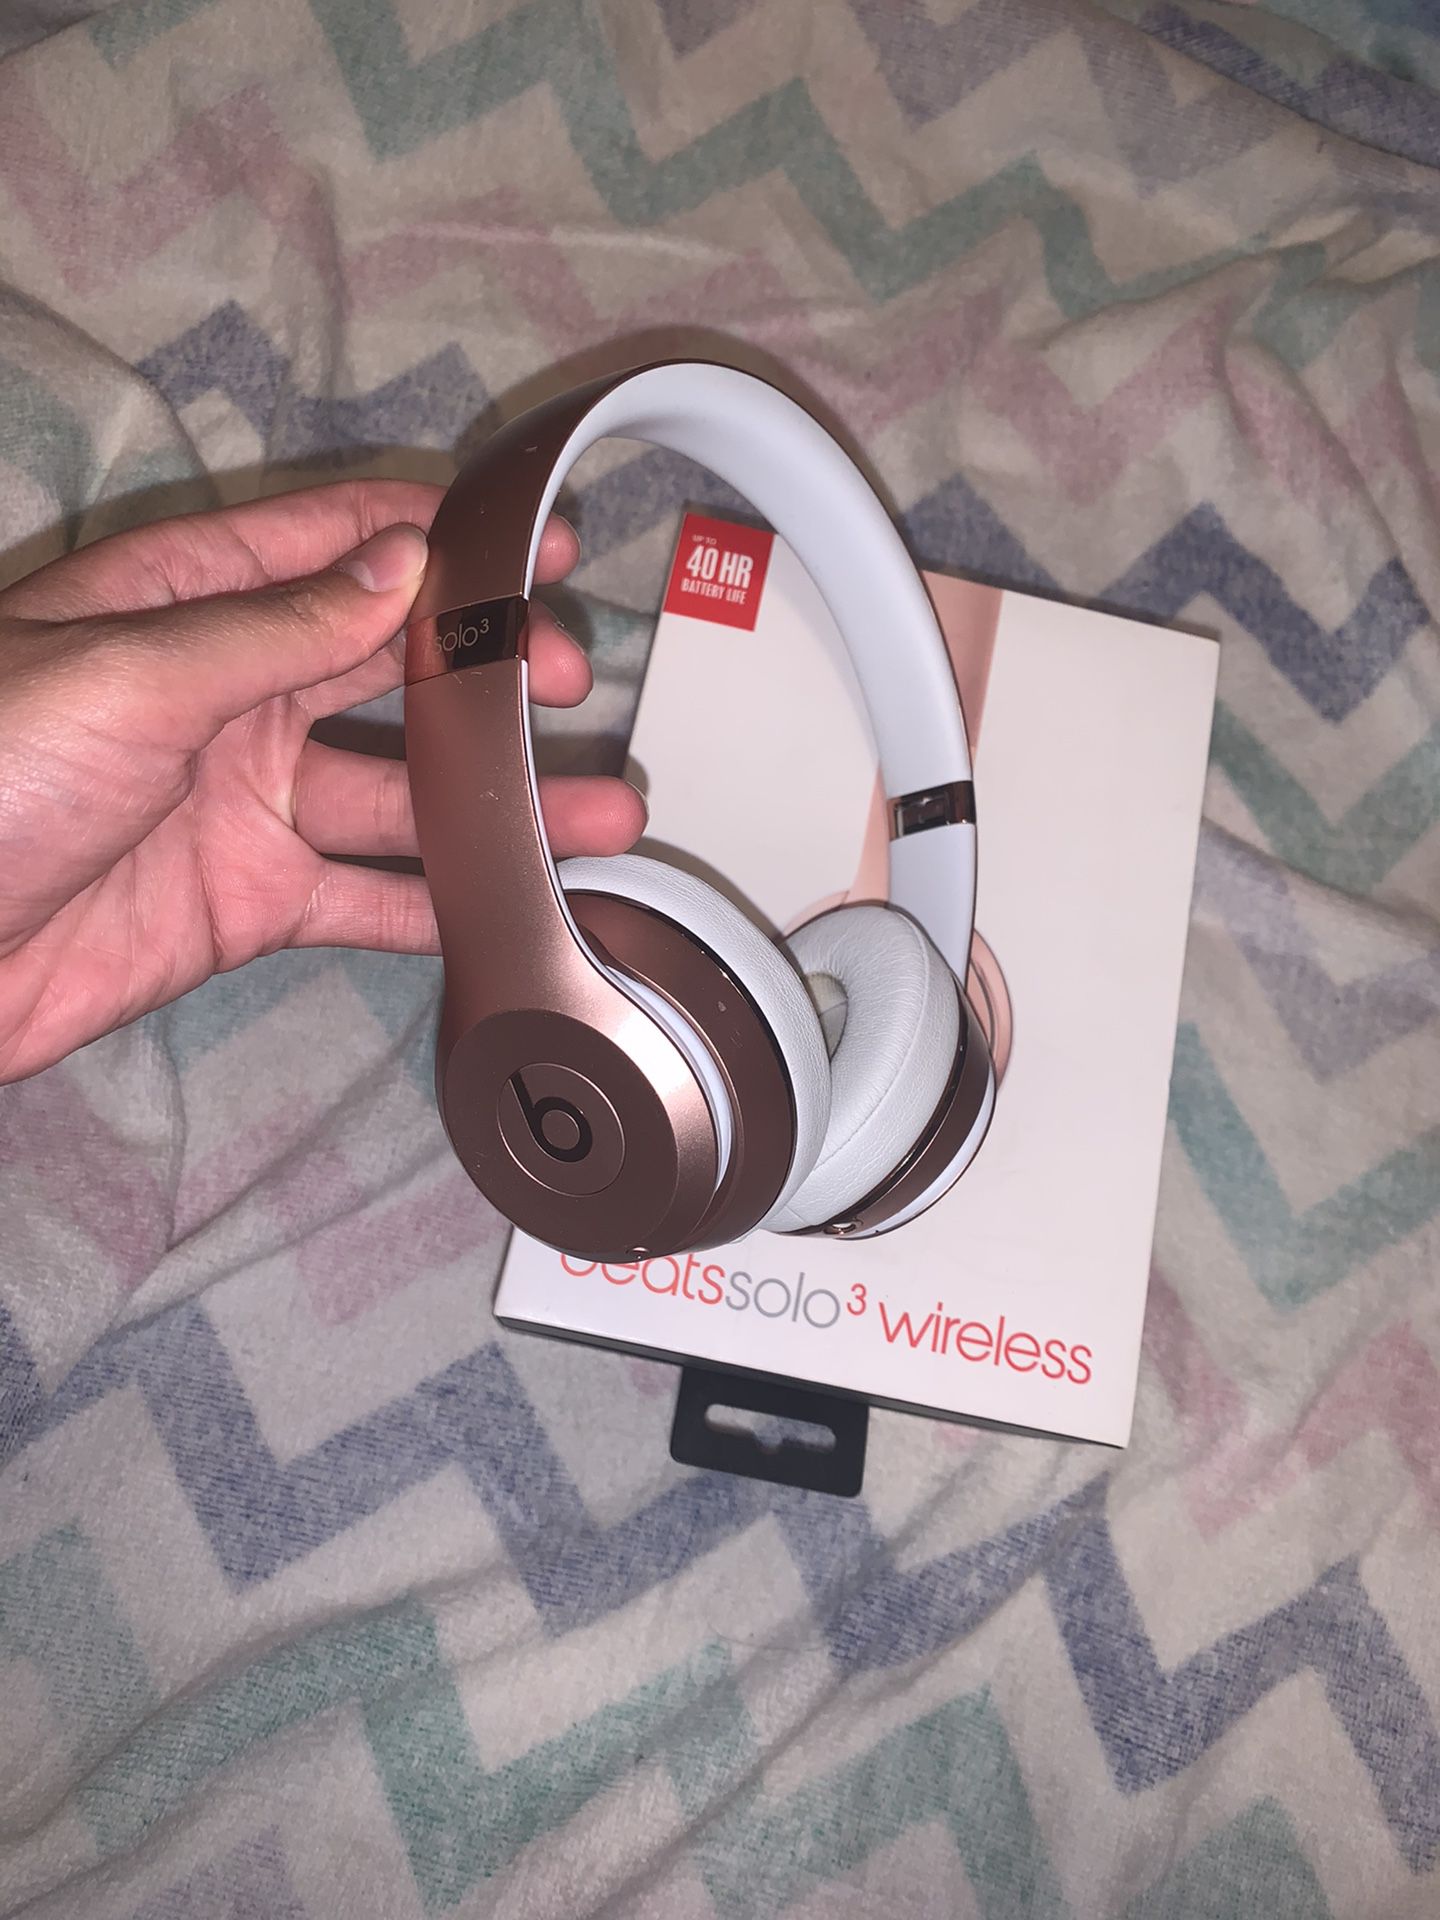 Rose Gold Beats by Dre solo^3 Wireless